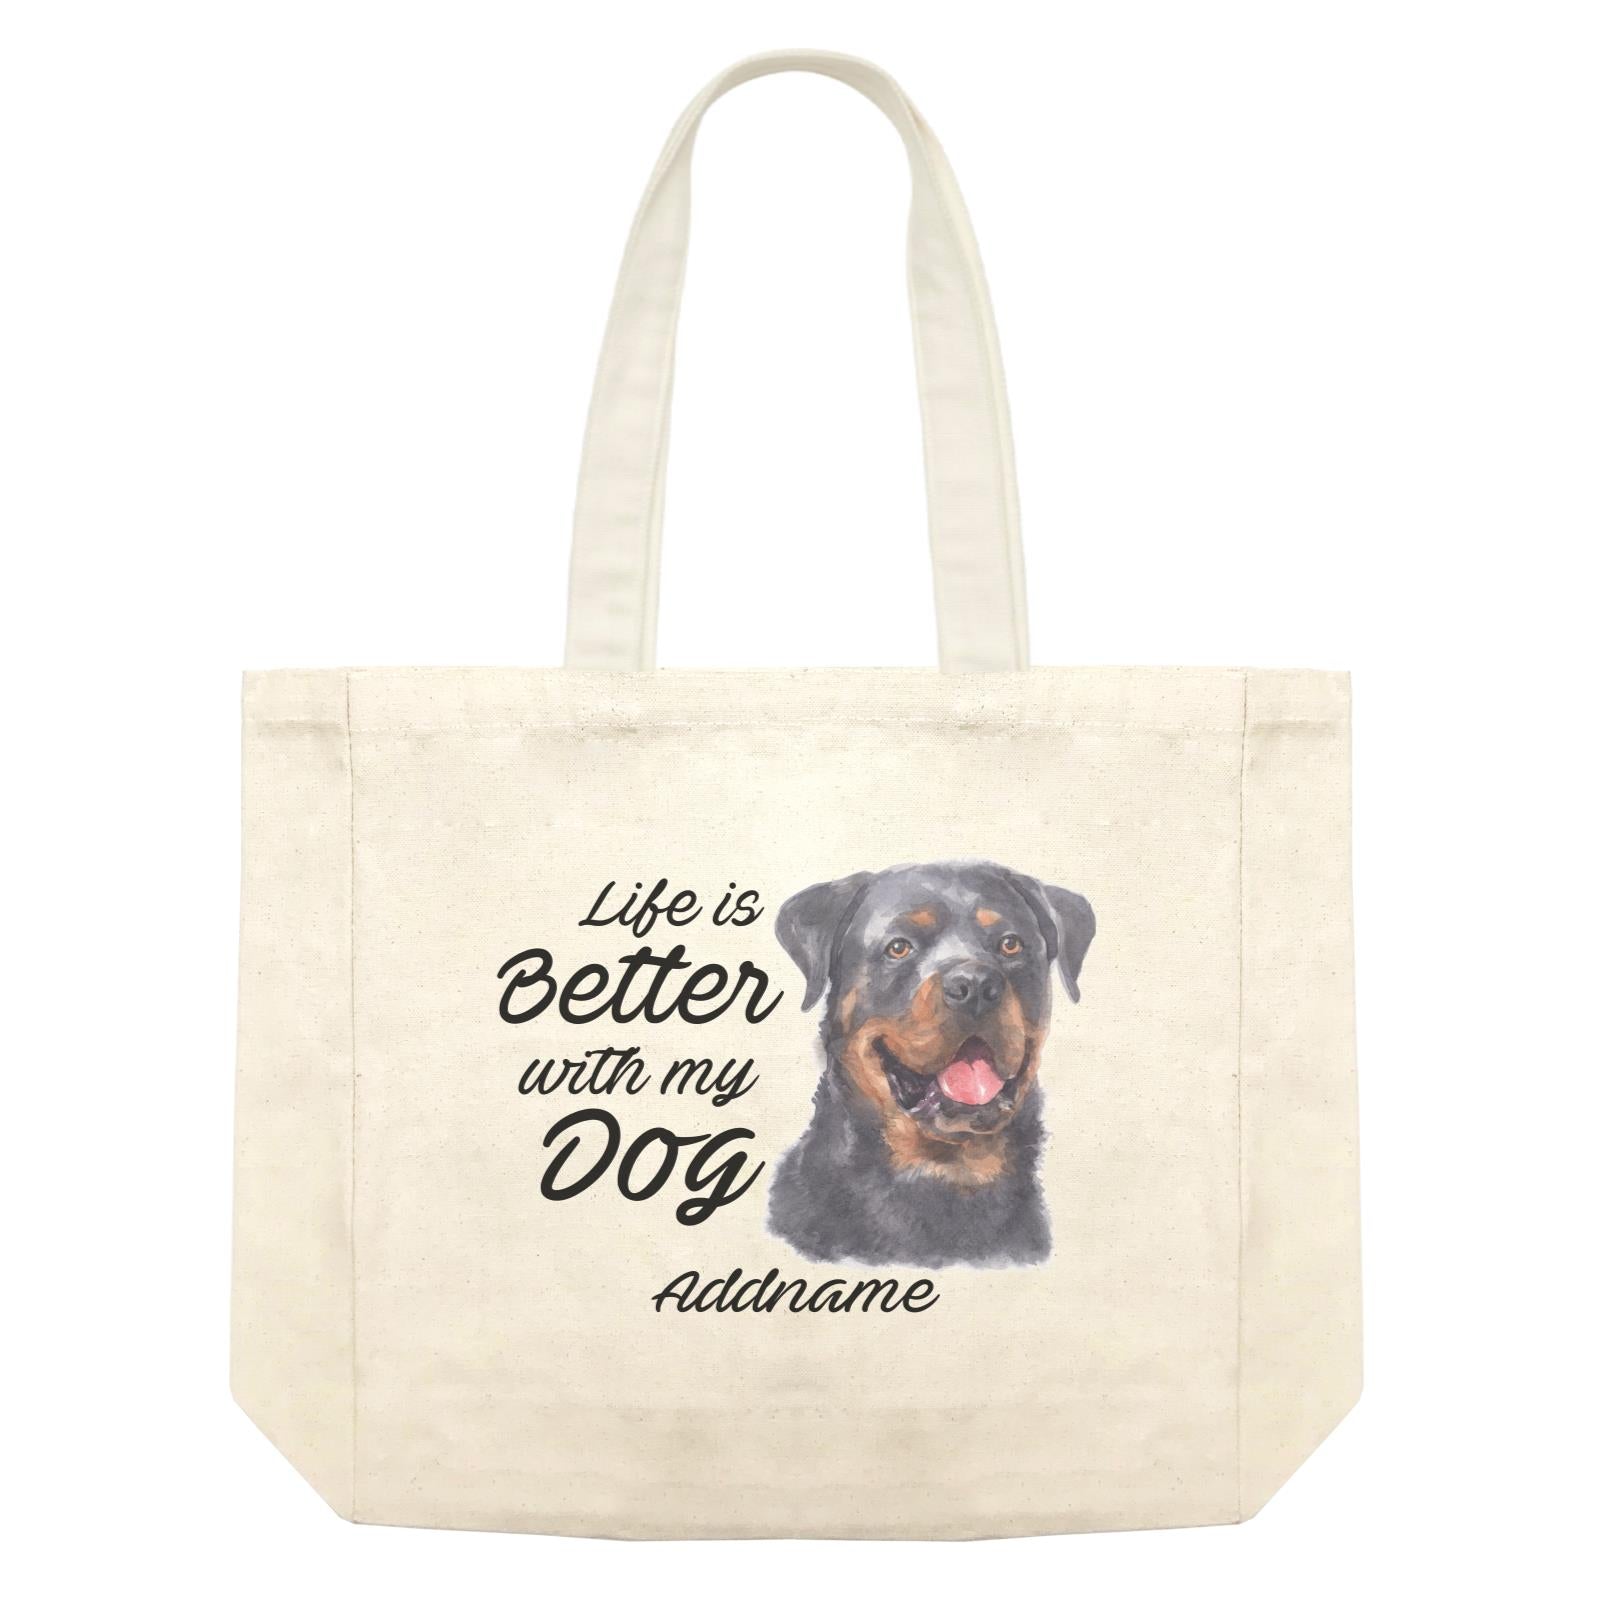 Watercolor Life is Better With My Dog Rottweiler Addname Shopping Bag